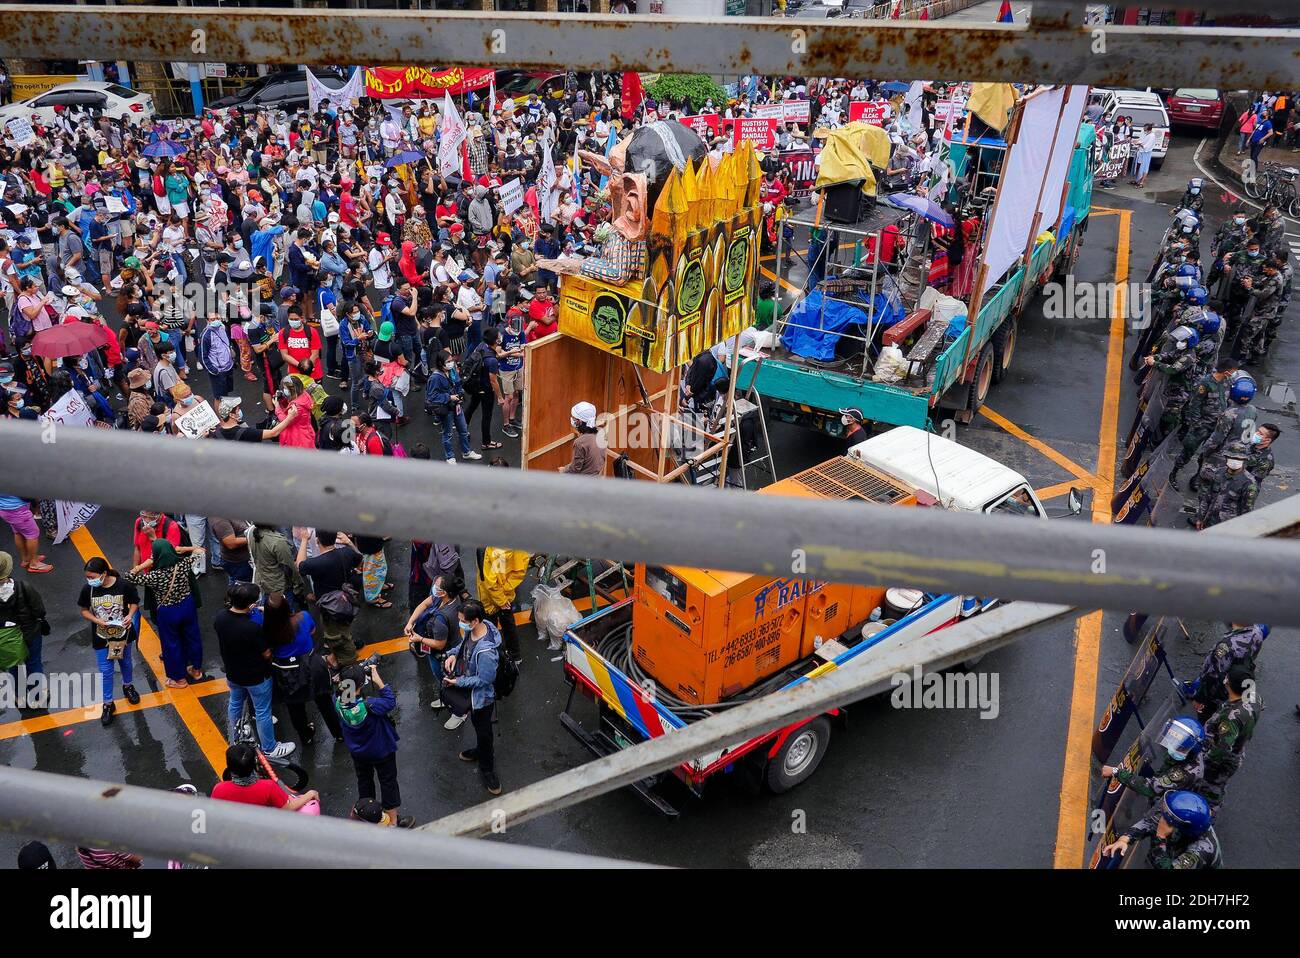 Manila, National Capital Region, Philippines. 10th Dec, 2020. Several groups gathered and protest at Mendiola Peace Arch for International Human Rights Day in Manila on 10 Dec 2020. Credit: George Buid/ZUMA Wire/Alamy Live News Stock Photo